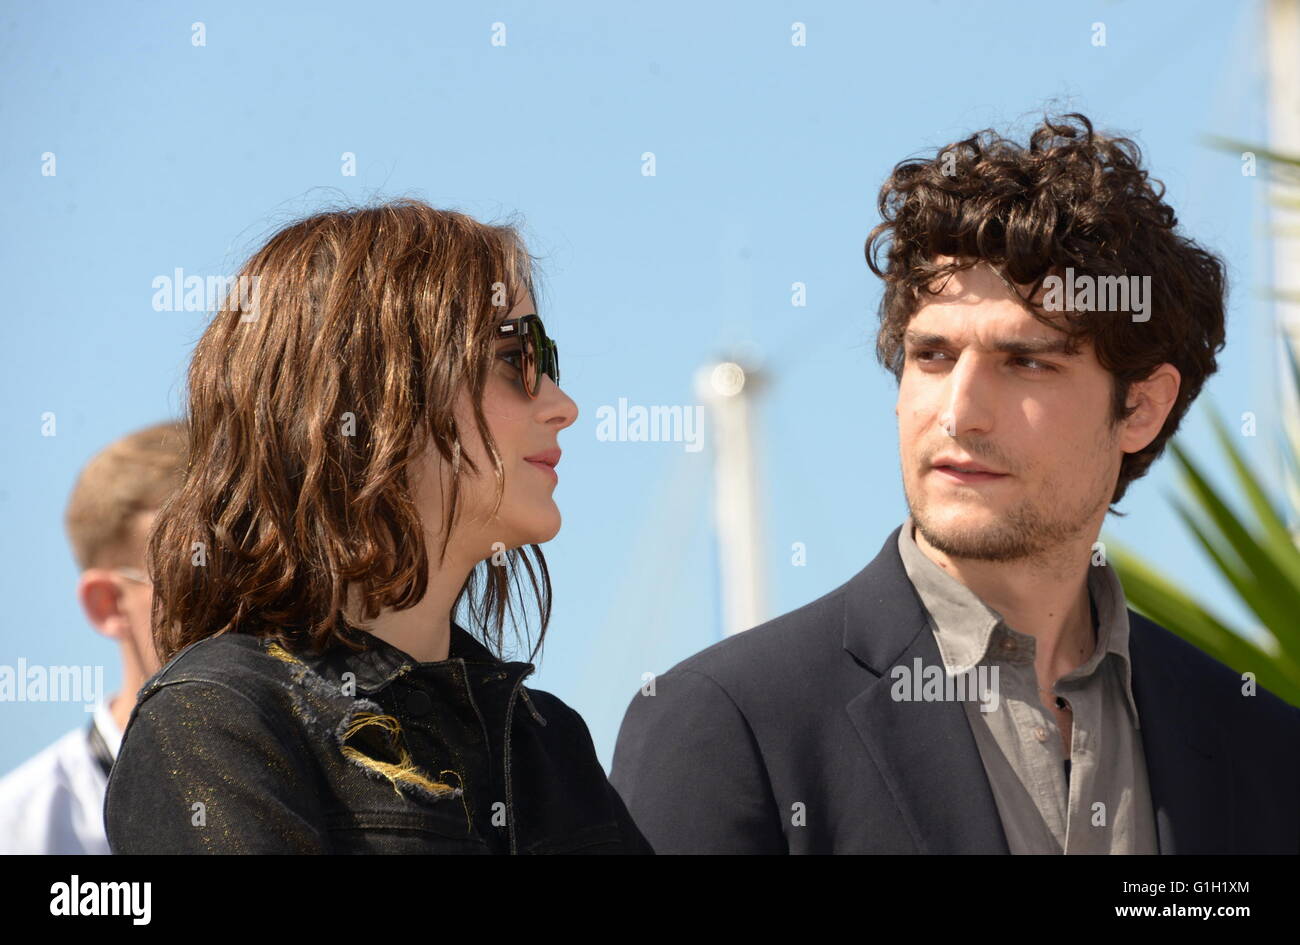 Photo: Louis Garrel and Marion Cotillard attend the Cannes Film